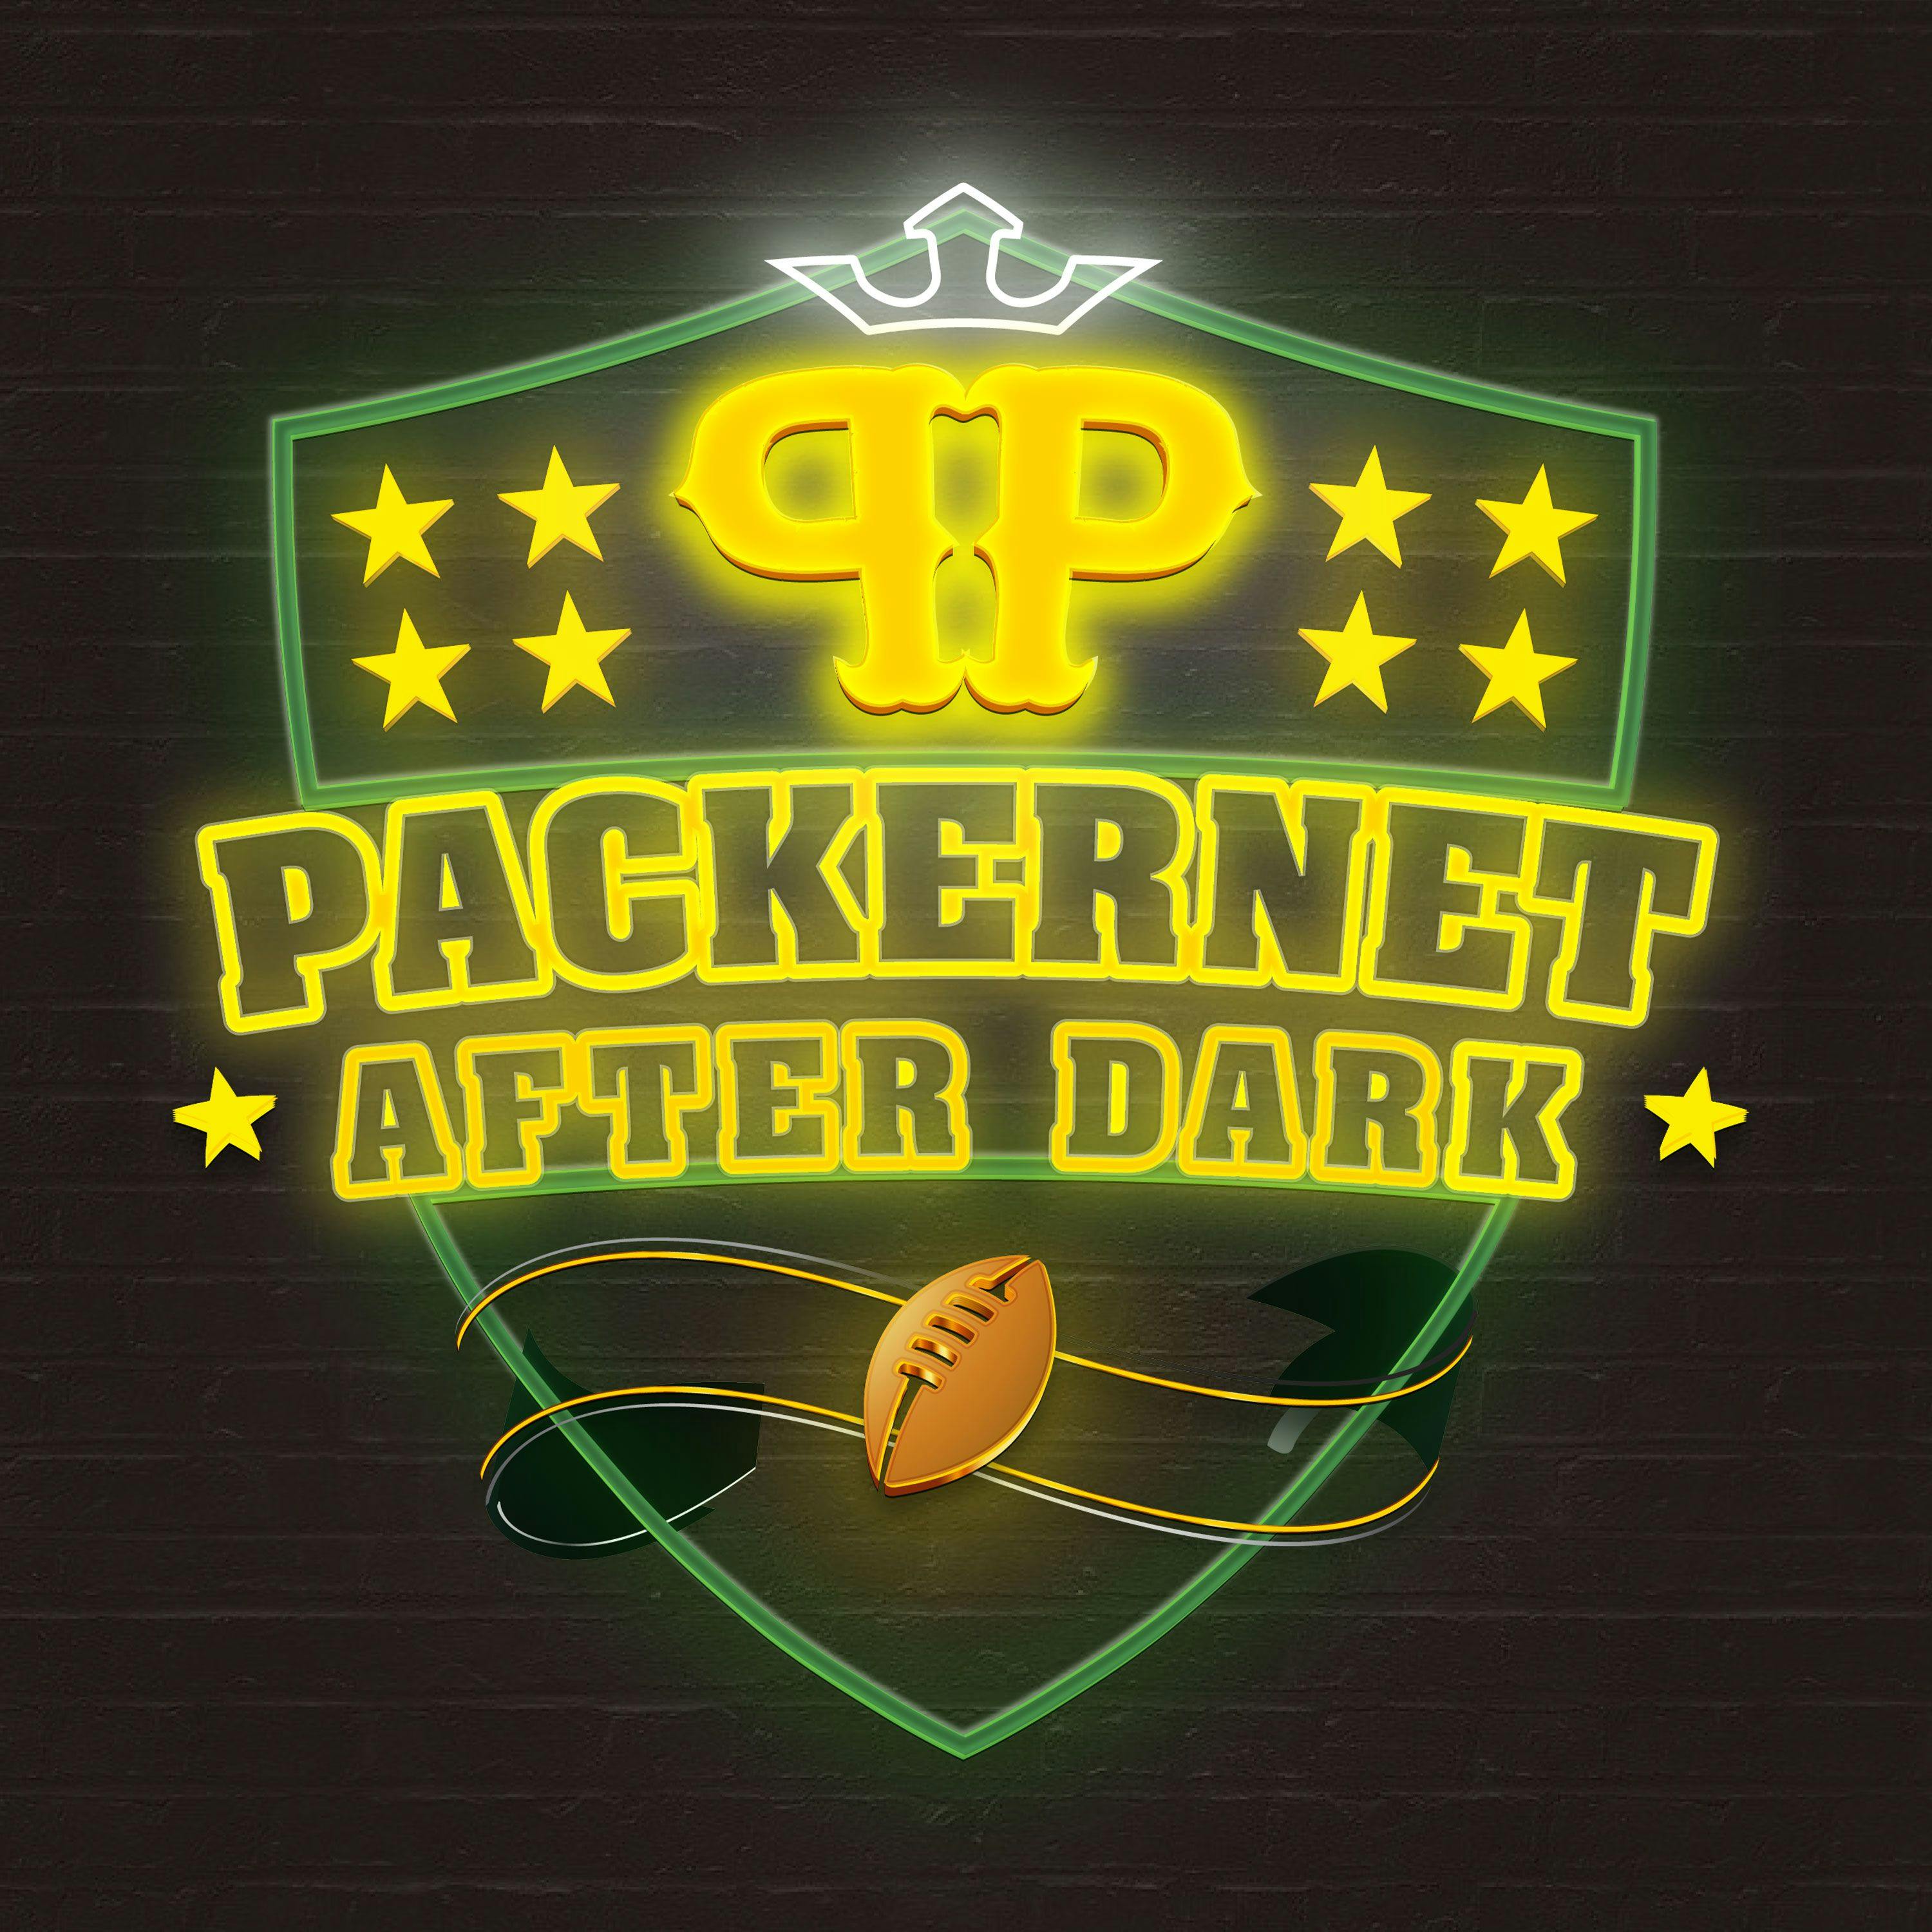 Packernet After Dark: Cricket Where Are You?